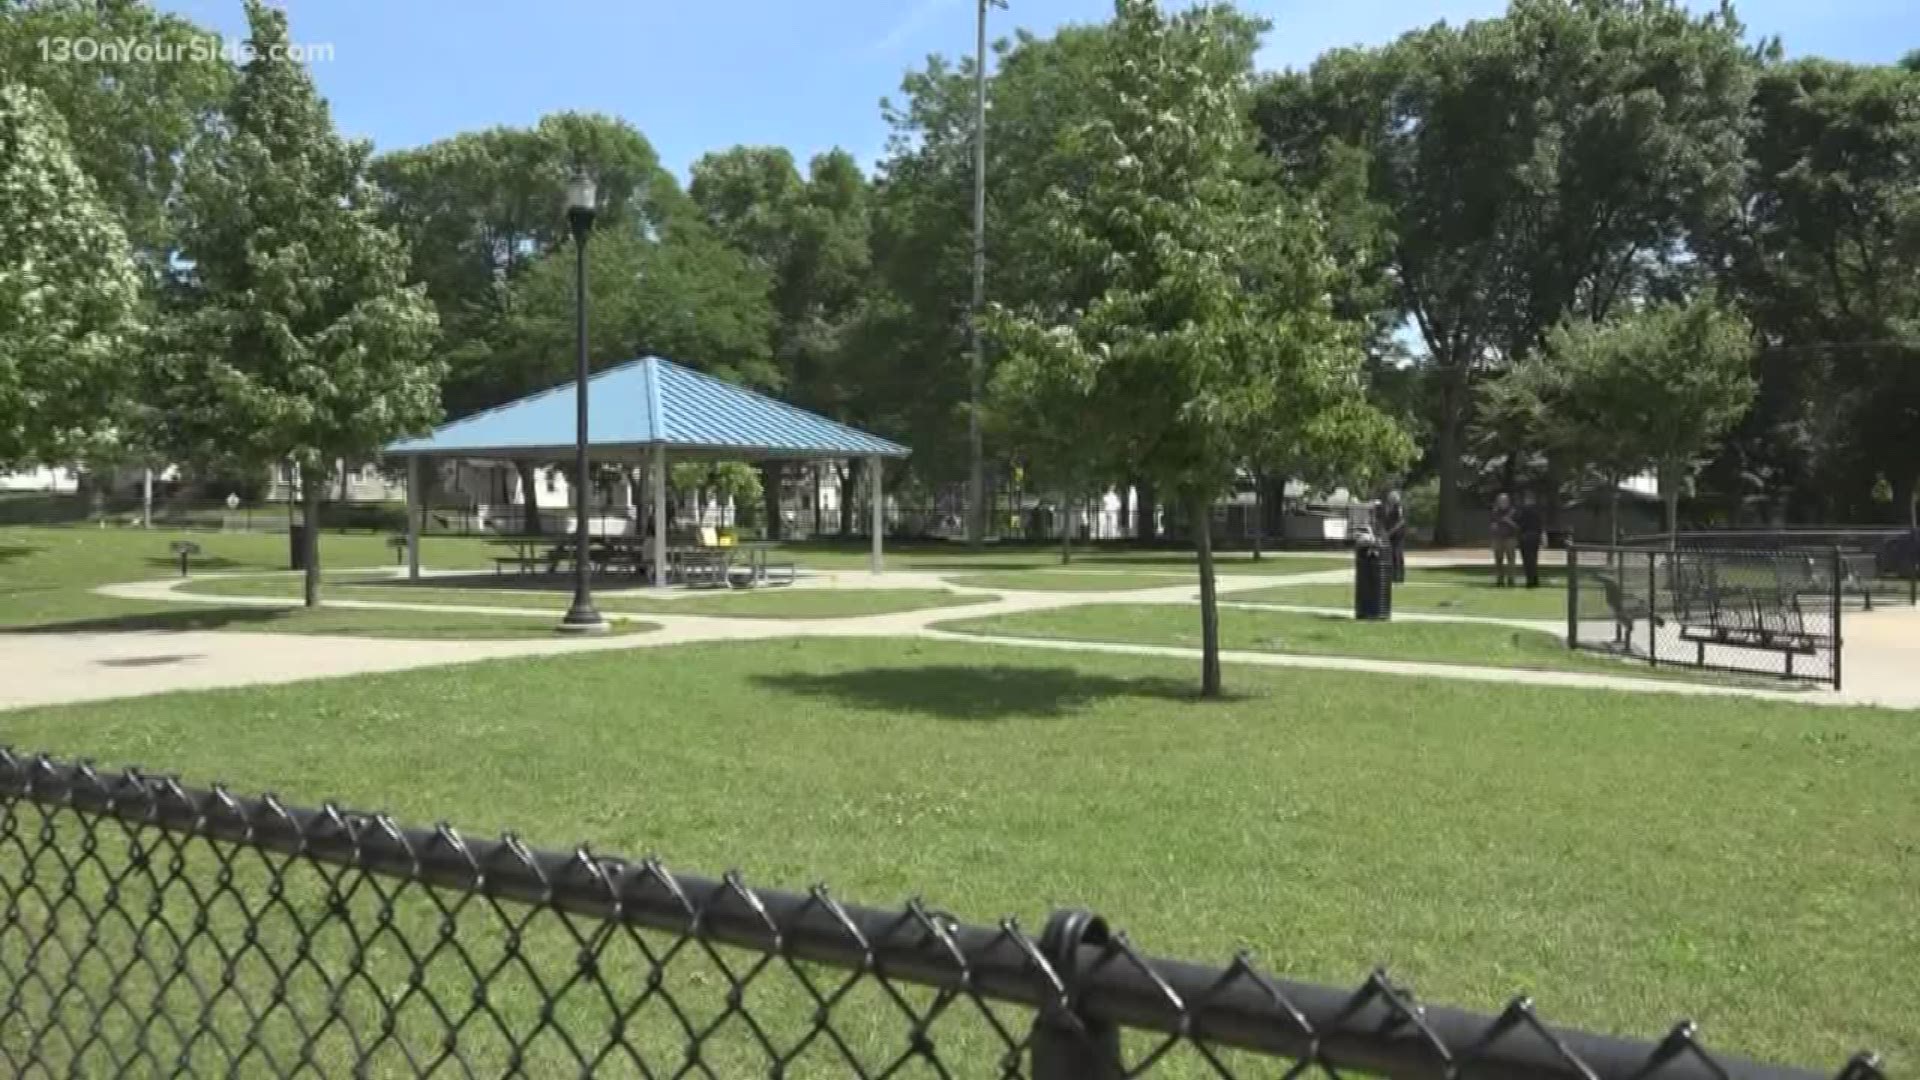 The shooting occurred around 2:30 p.m. at Joe Taylor Memorial Park.